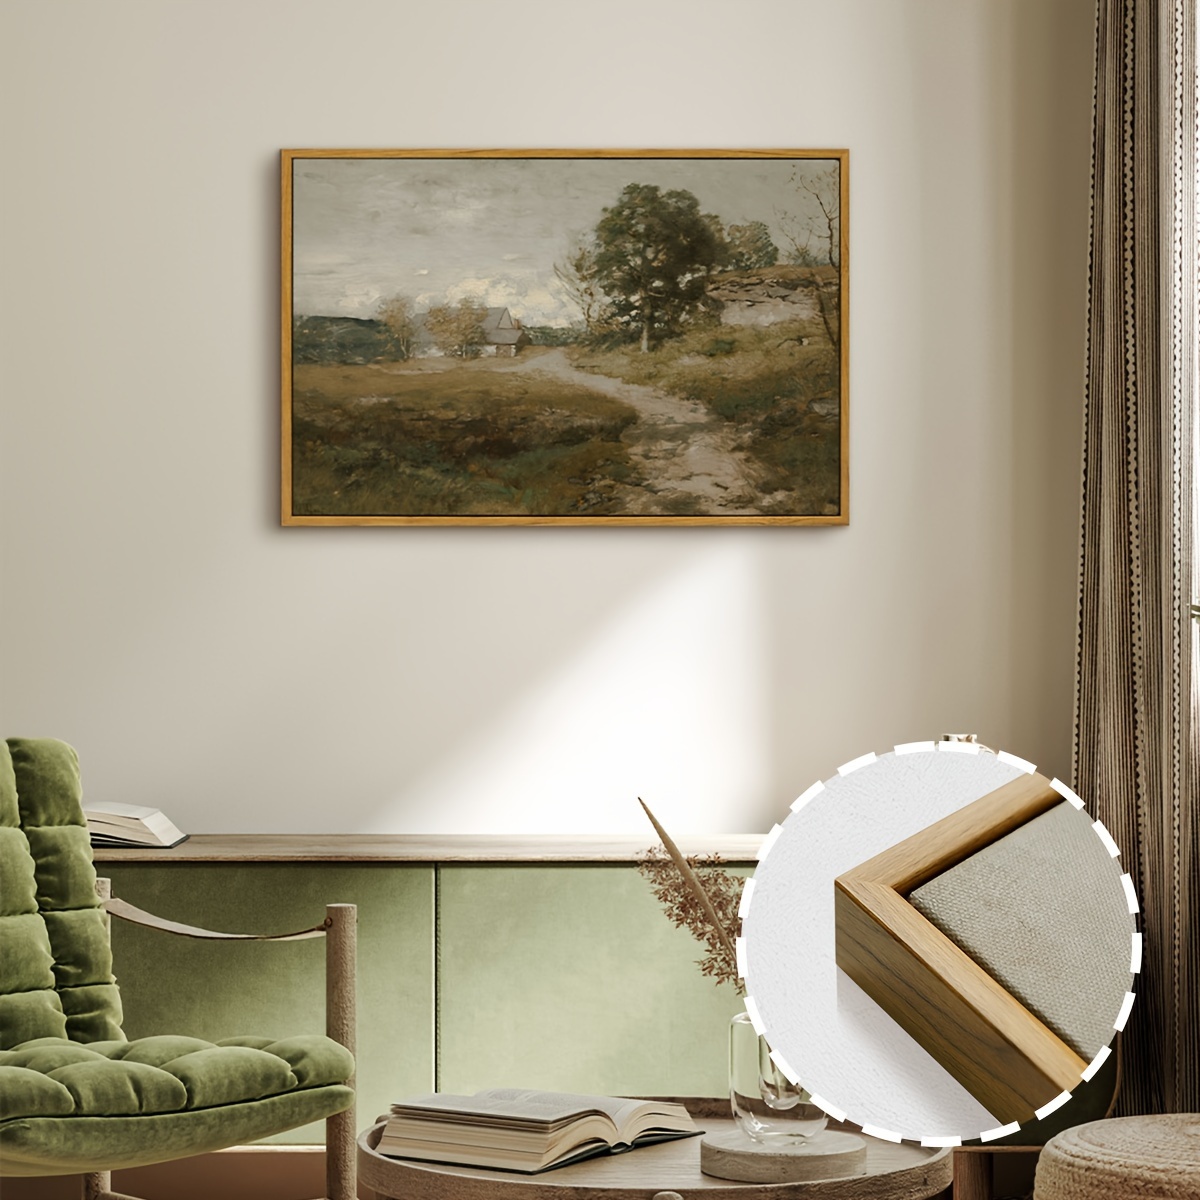 

1 Piece Framed Canvas Wall Art Room Decoration, Classical Oil Painting Canvas Print, Vintage Landscape Wall Art Home Decor, Measuring 16*24 Inches.